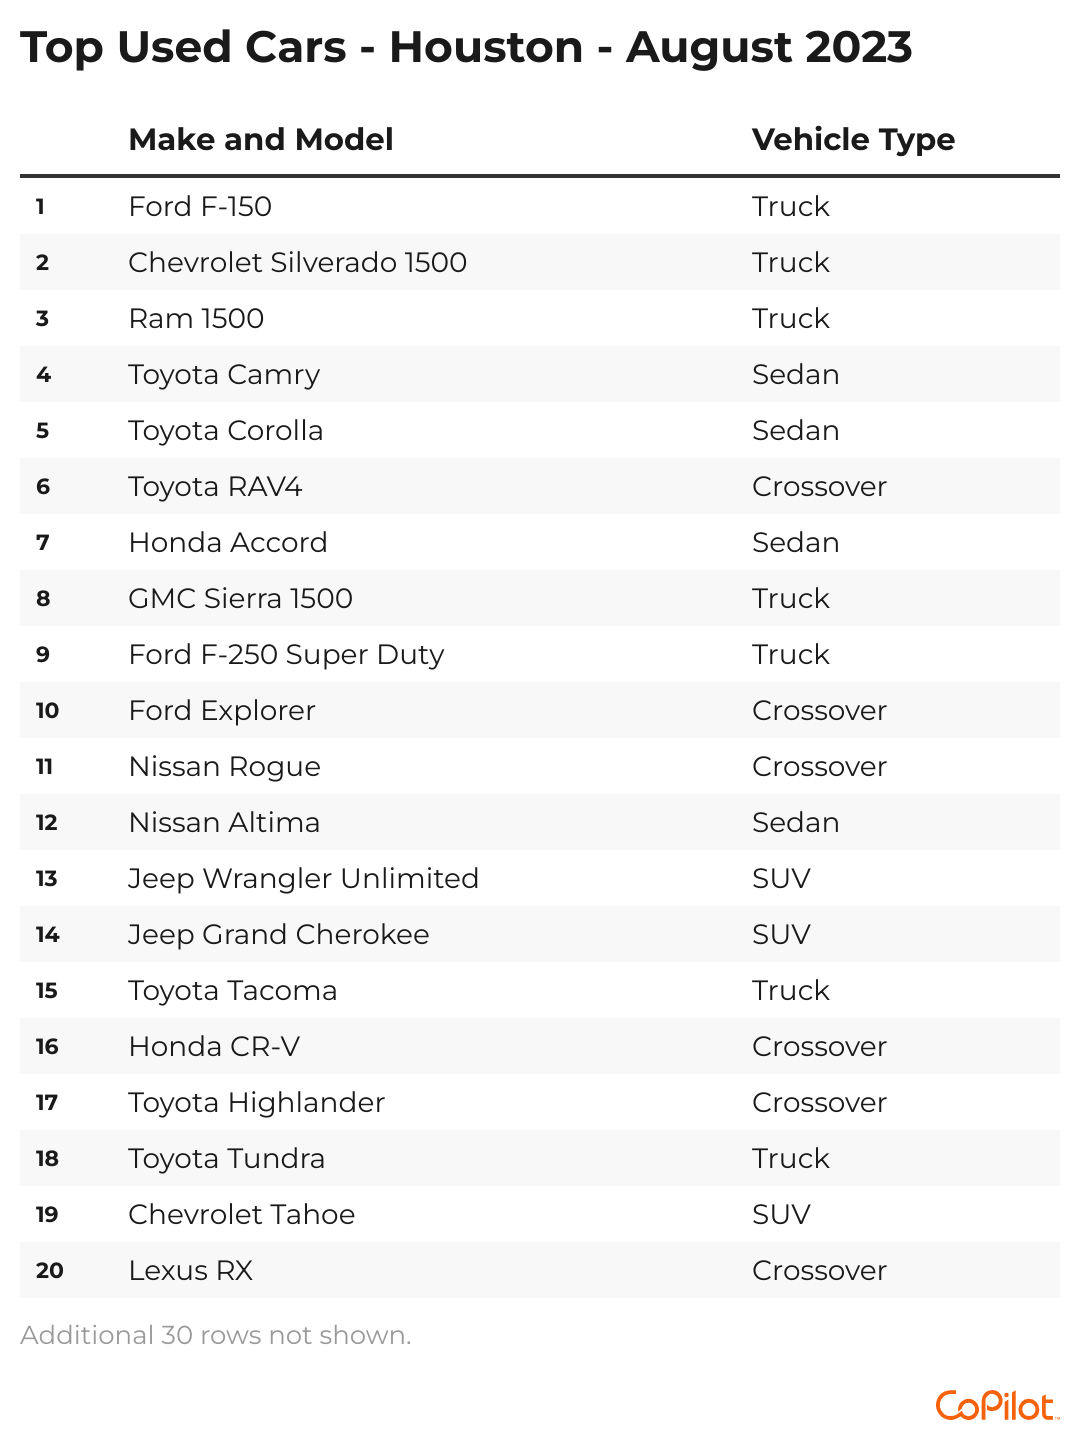 A chart showing the 20 top-selling used cars in the Houston metro area